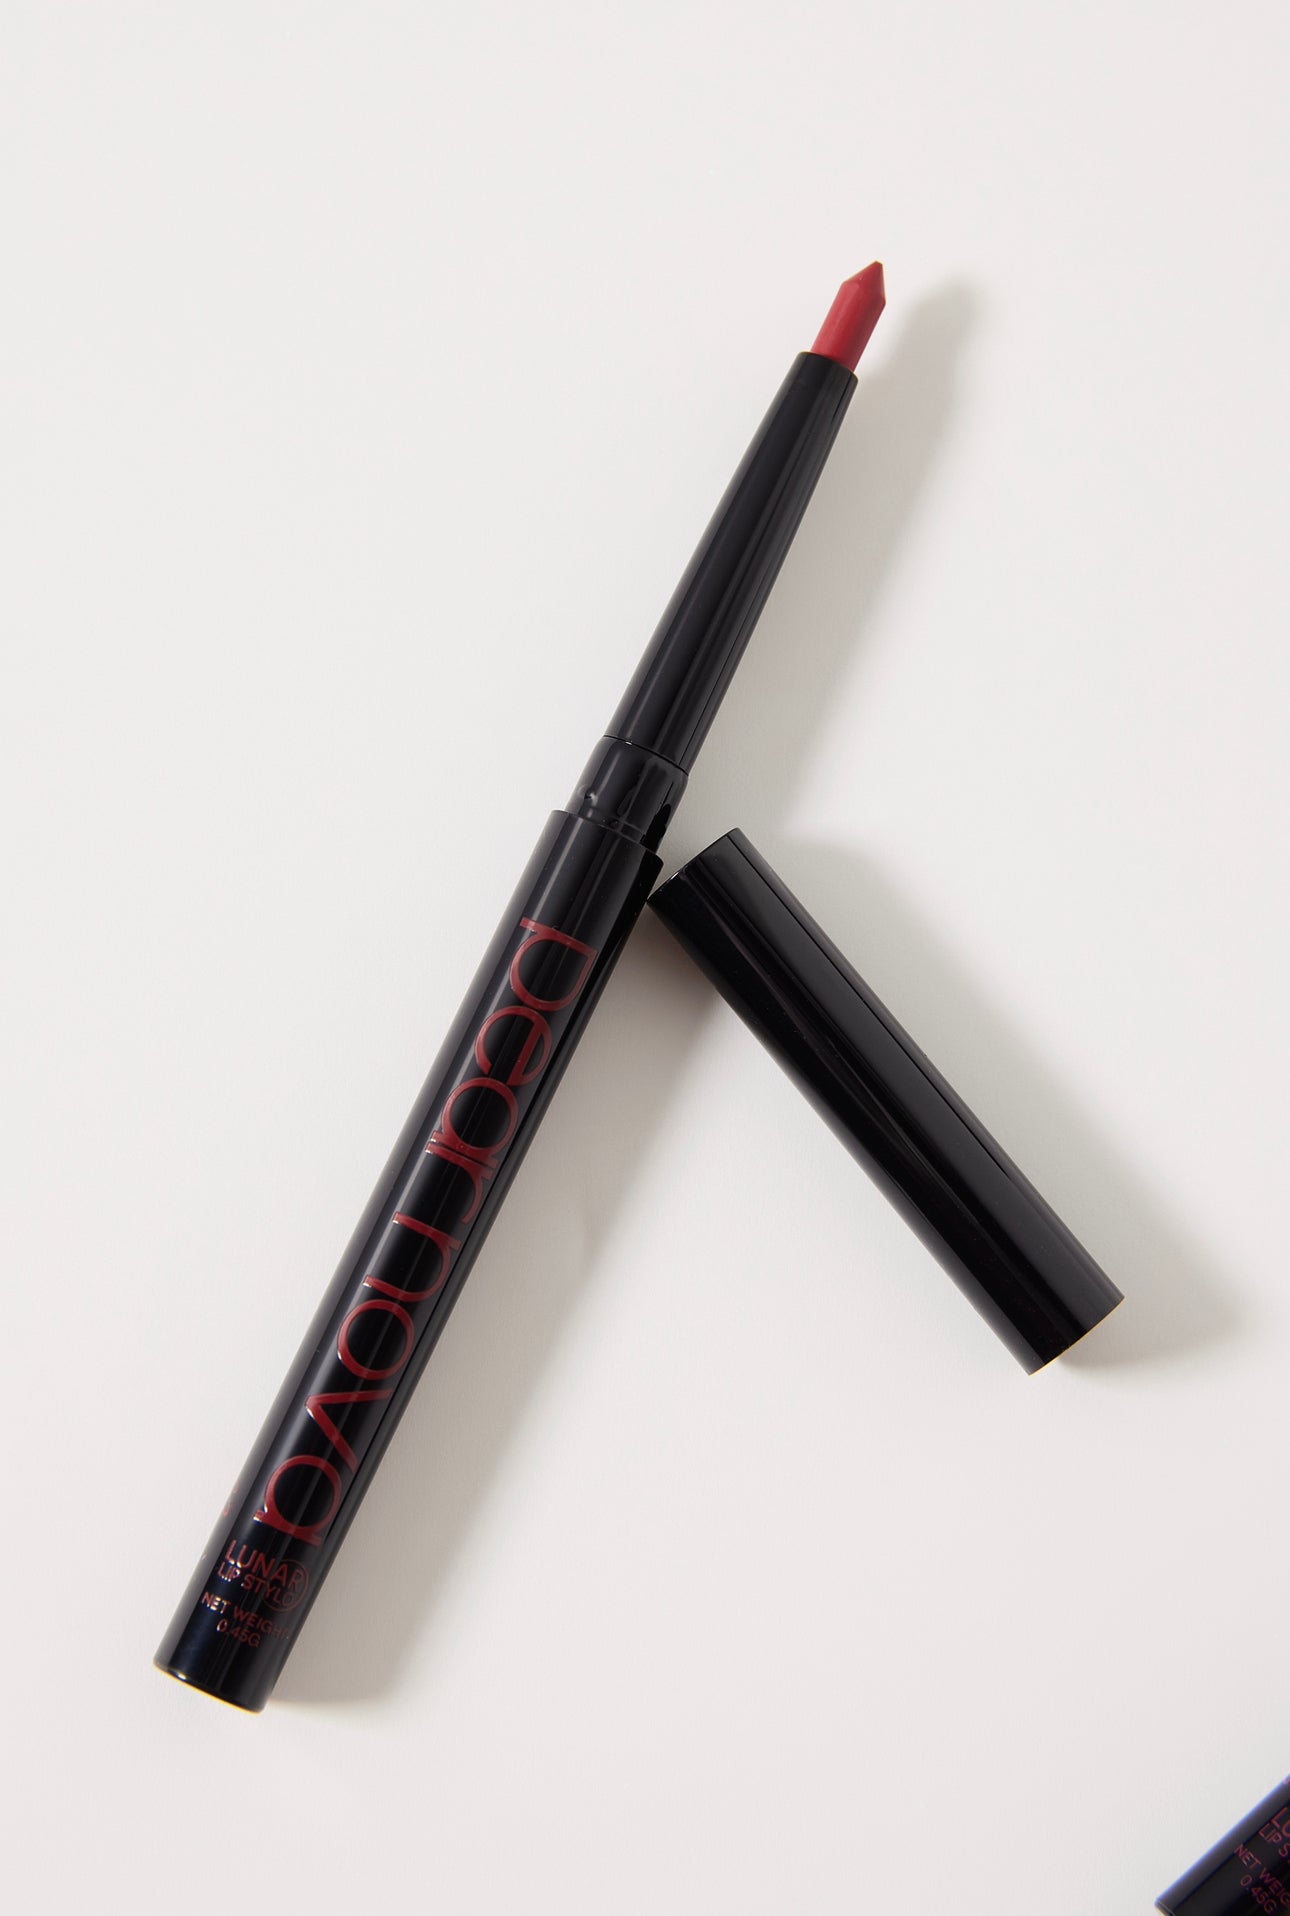 Starlet Lunar Lip Stylo with cap off to show lip liner